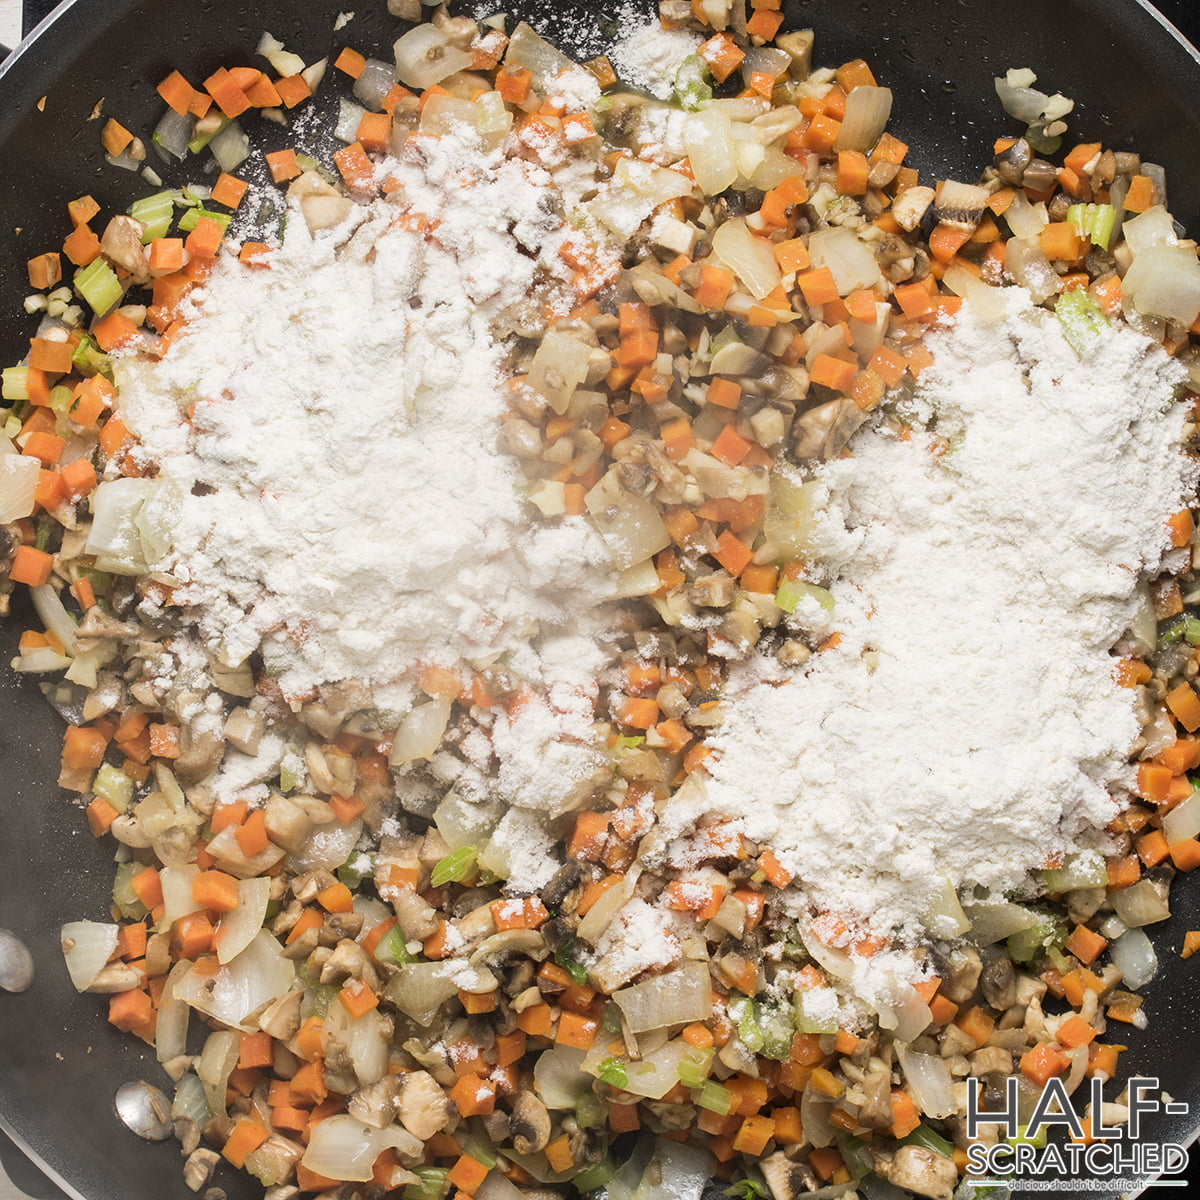 Adding flour to fried vegetables